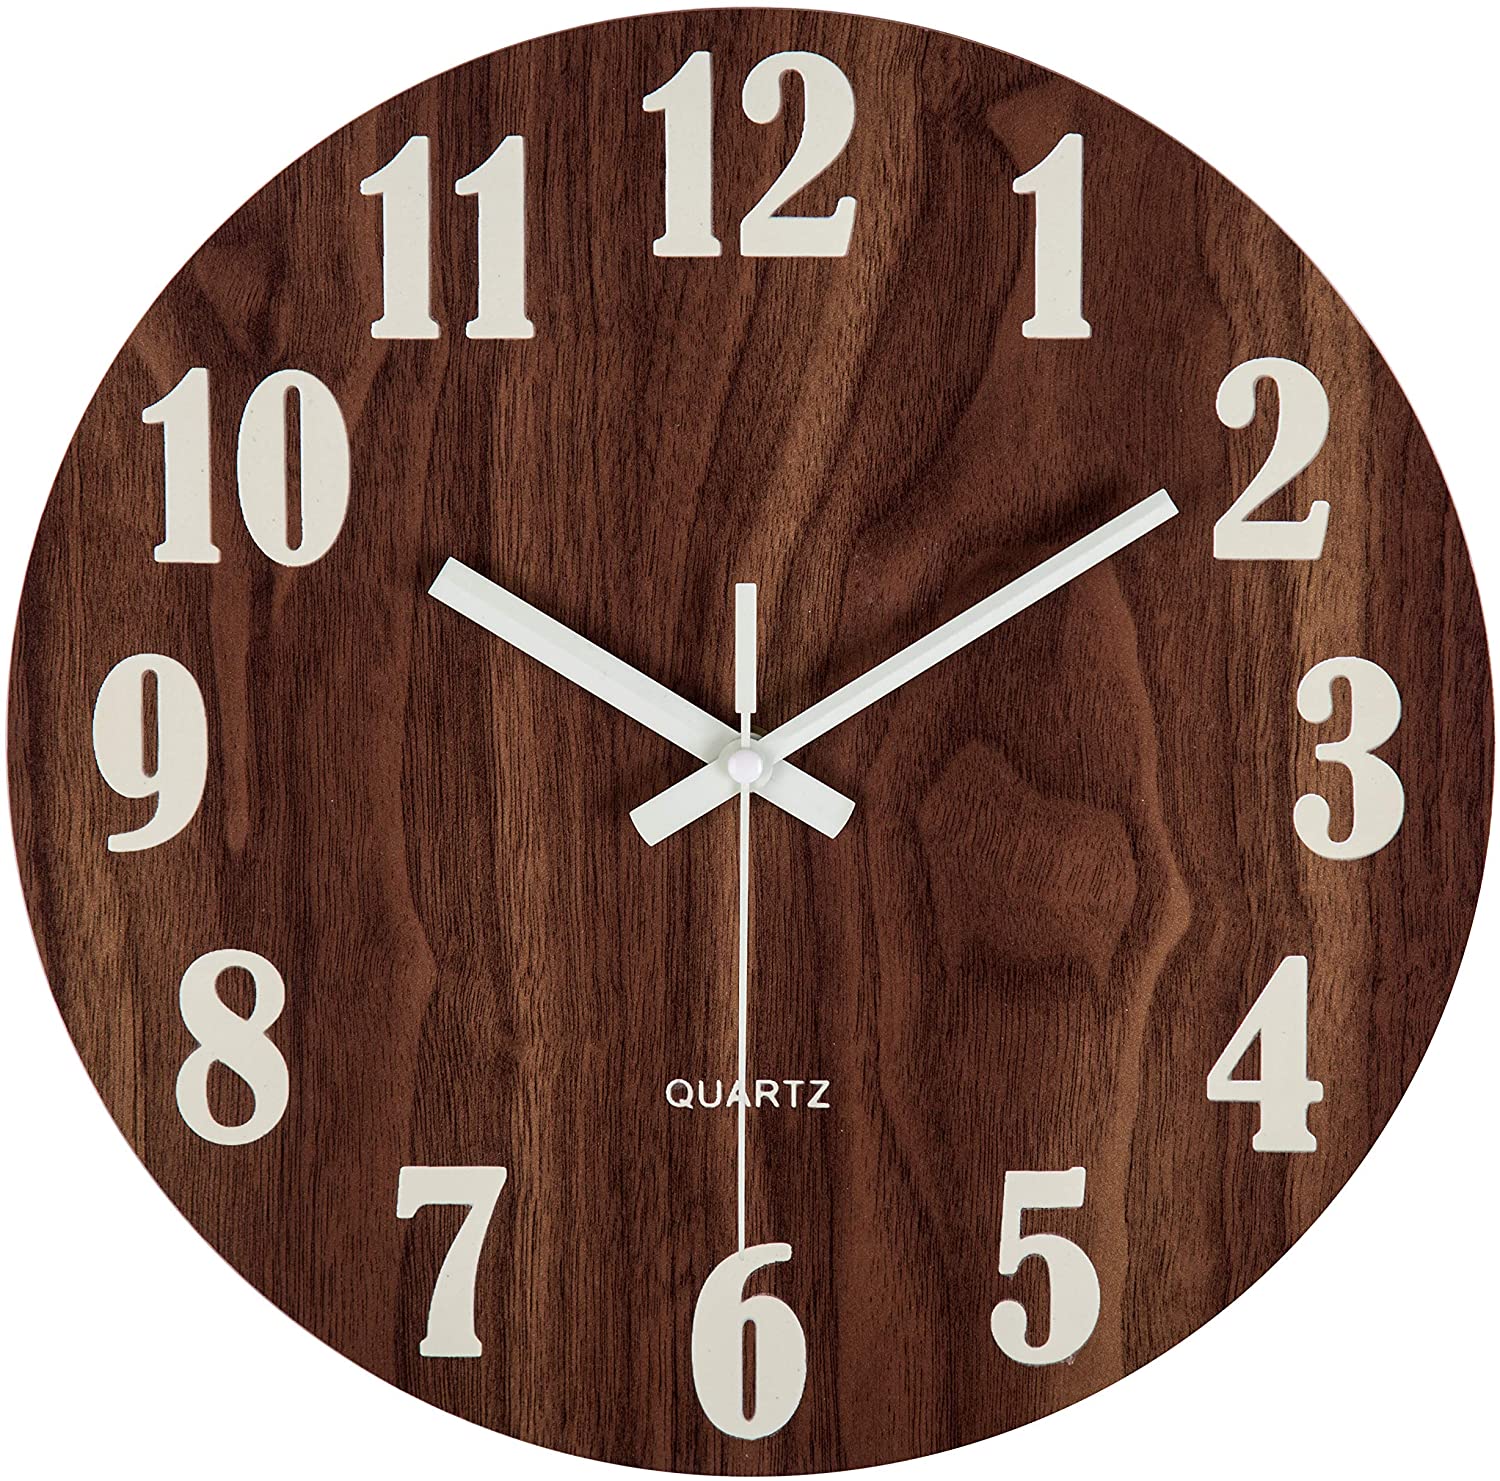 3014-12IN-Brown Jomparis 12" Night Light Function Wooden Round Wall Clock Vintage Rustic Country Tuscan Style for Kitchen Bedroom Office Home Silent & Non-Ticking Large Numbers Battery Operated Indoor Clocks(Brown)